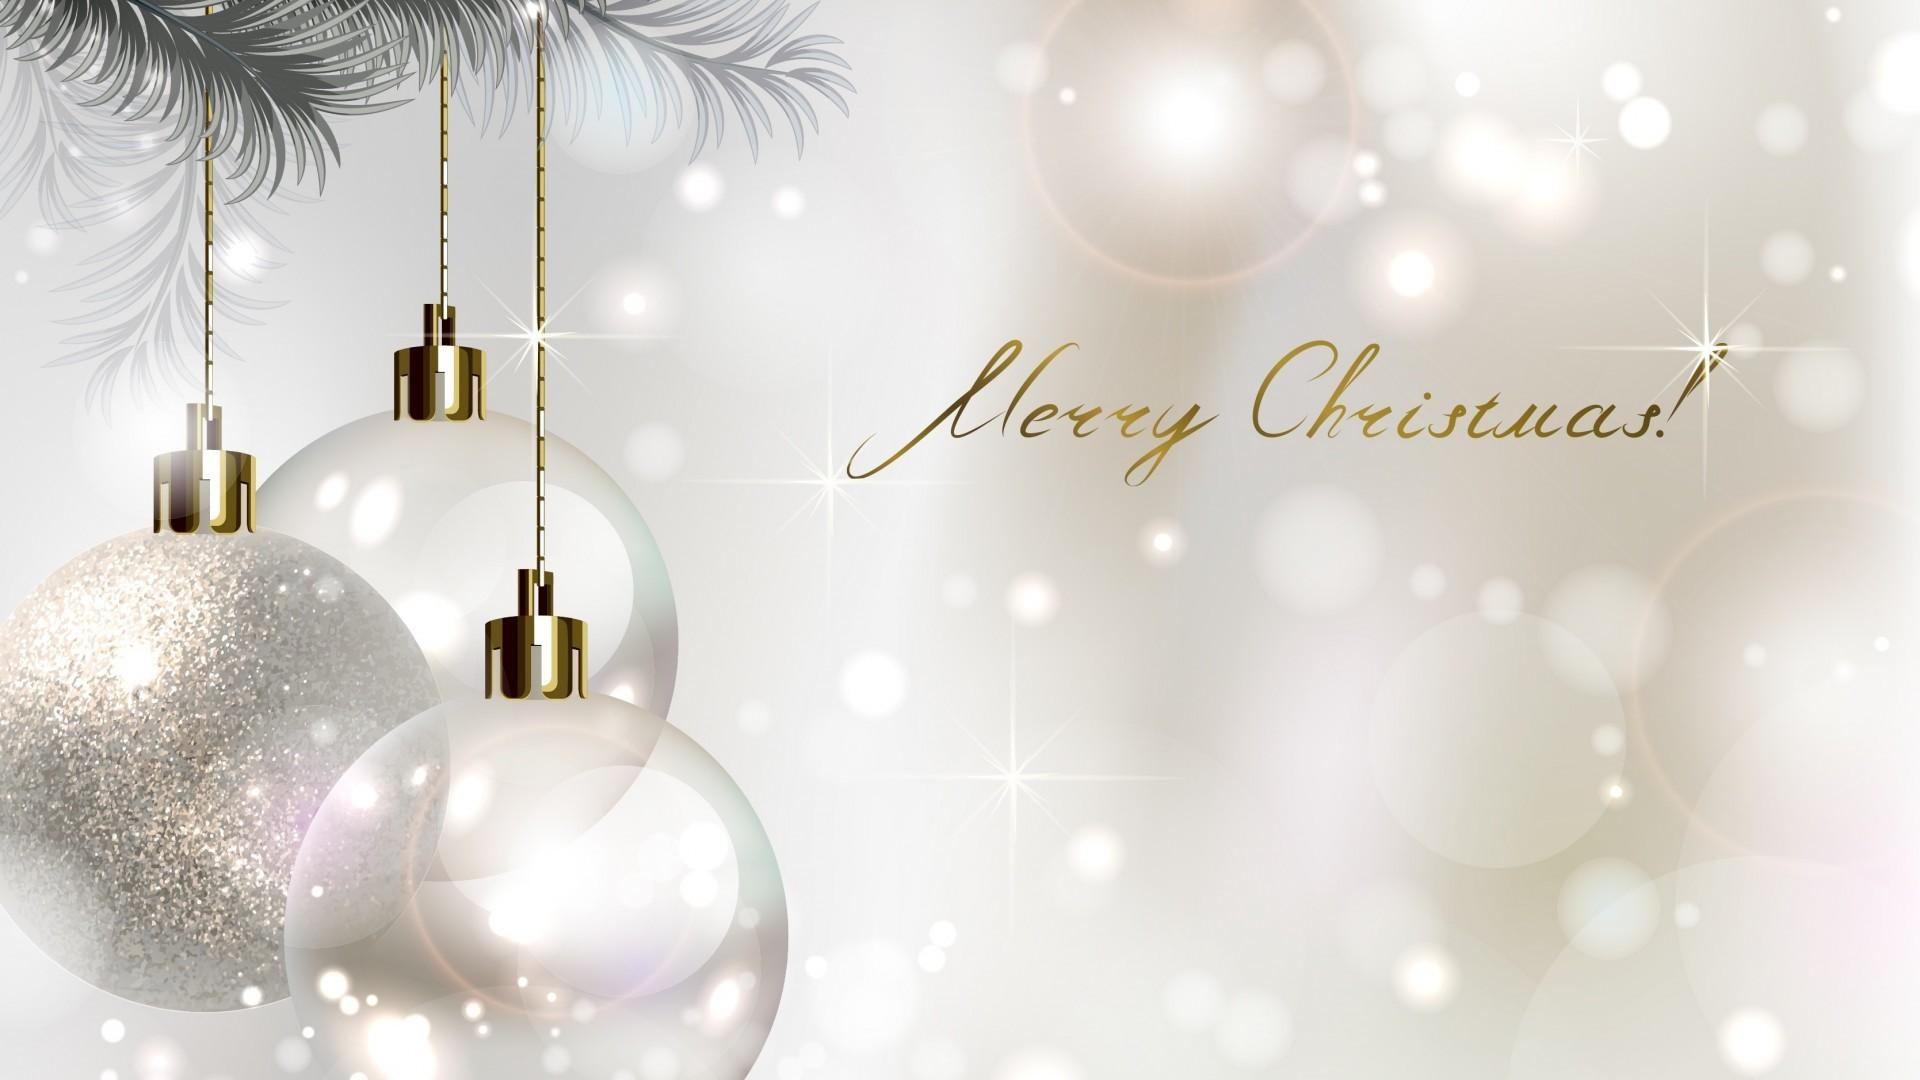 Merry Christmas Backgrounds Wallpapers